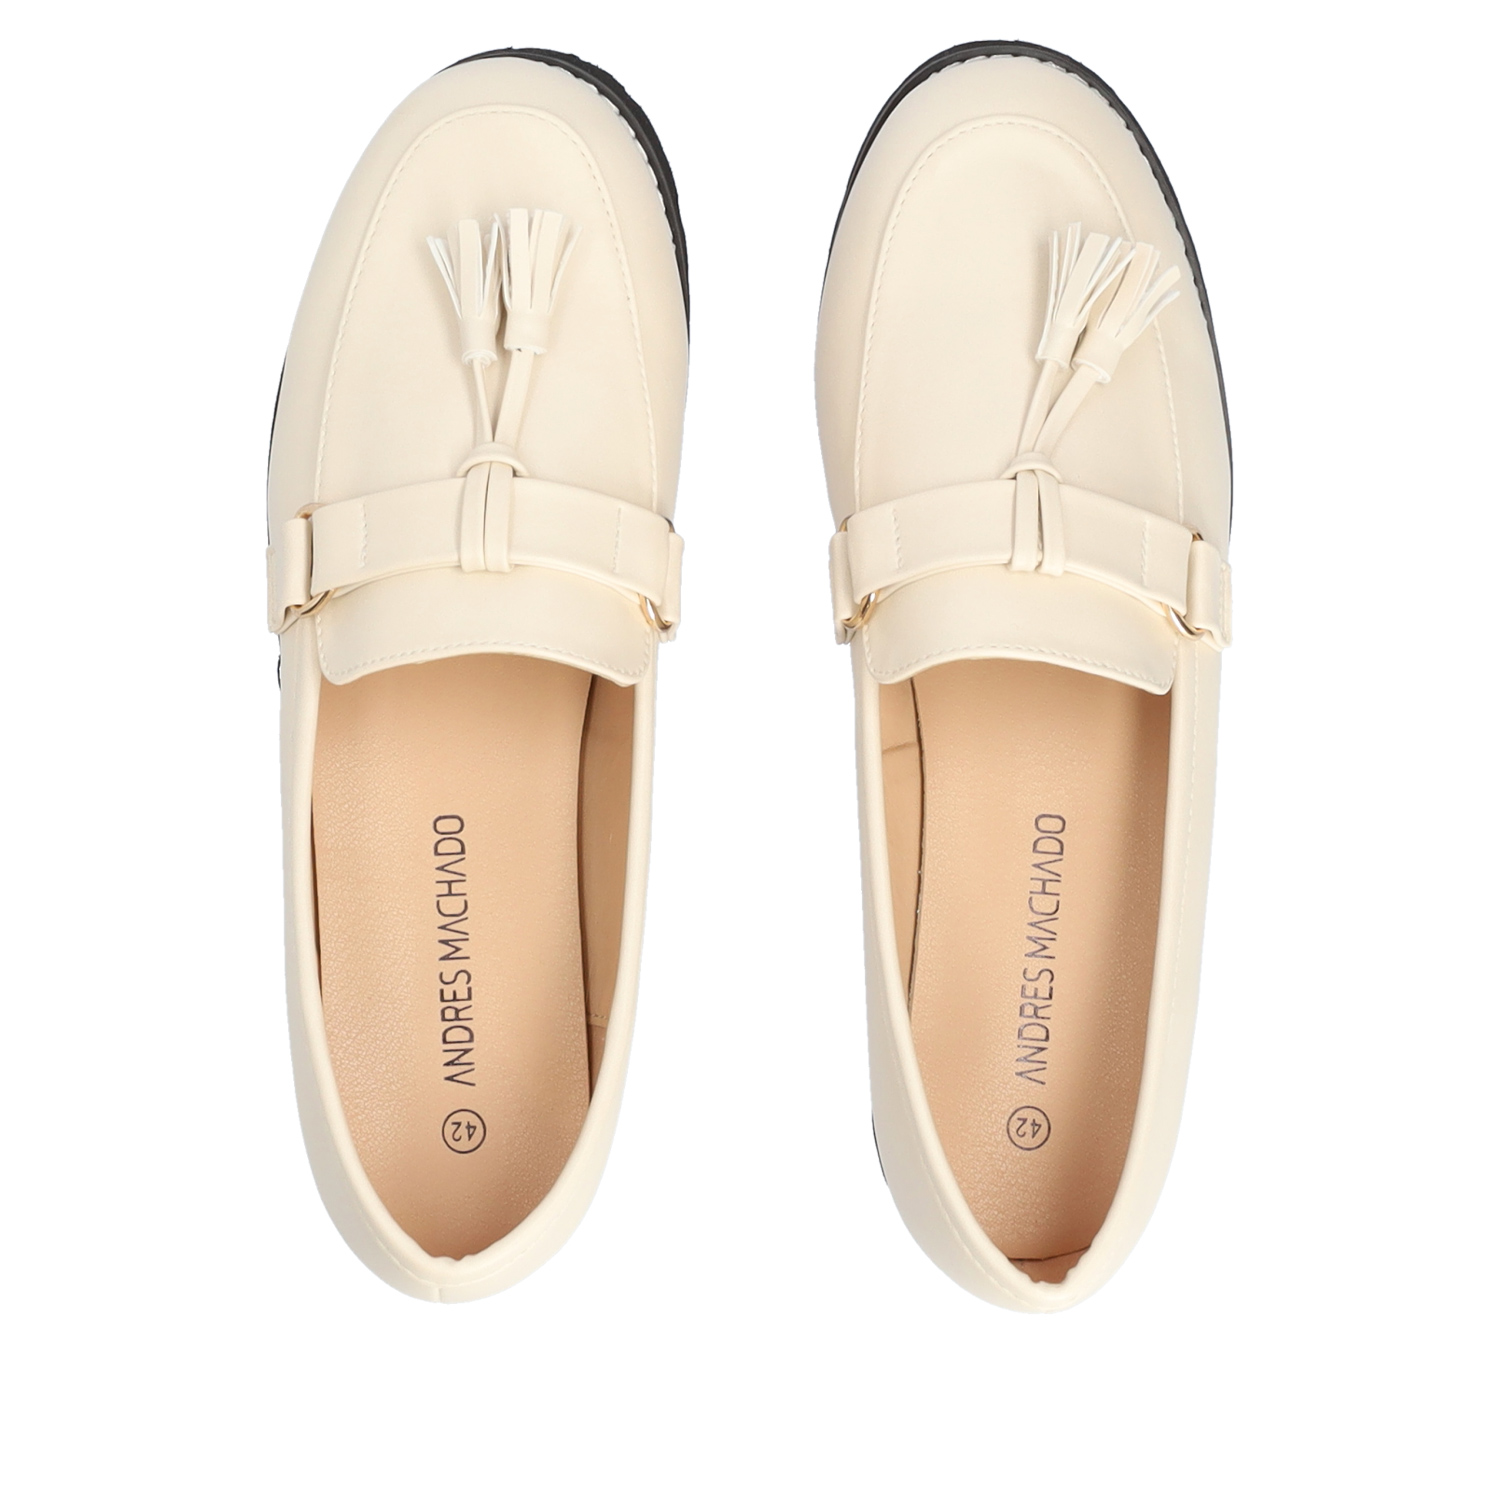 Moccasins in ivory colored faux leather and tassle 